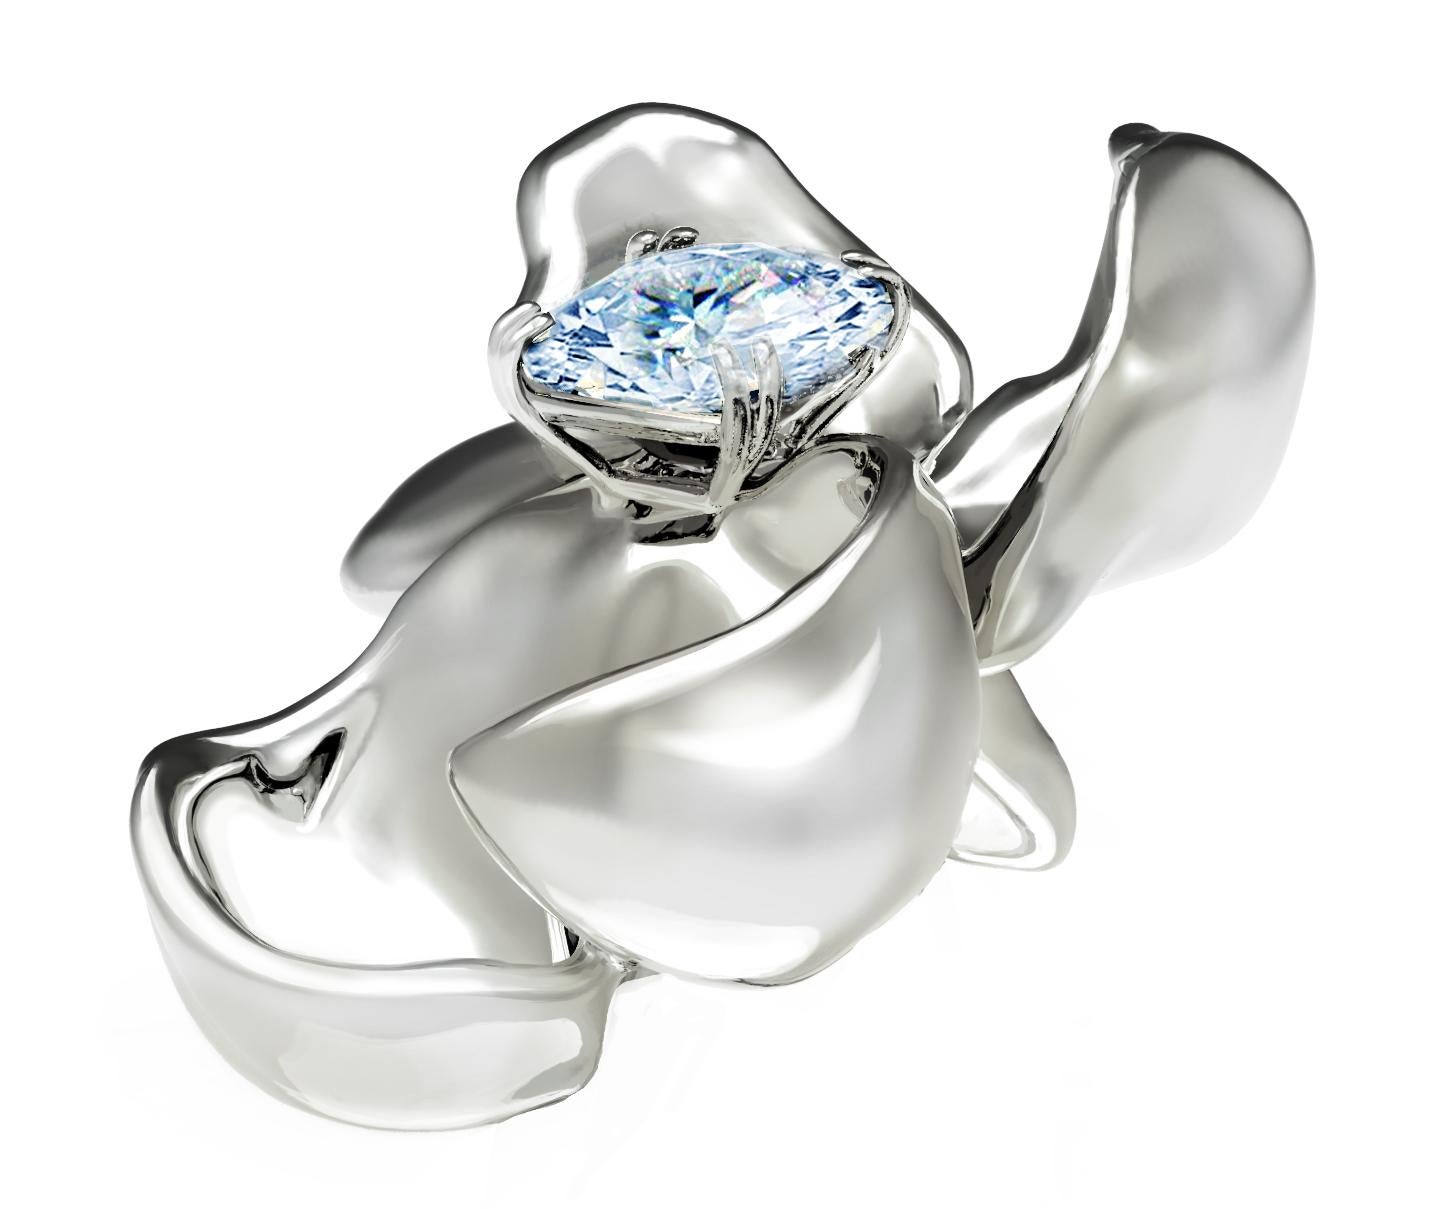 This Magnolia Flower contemporary brooch is in 18 karat white gold with clear and shiny light blue sapphire, 0.65 carats. The water-surface of the gem multiplies the light, mirroring on the golden petals. The weight is 8.5 gr. The ring from this